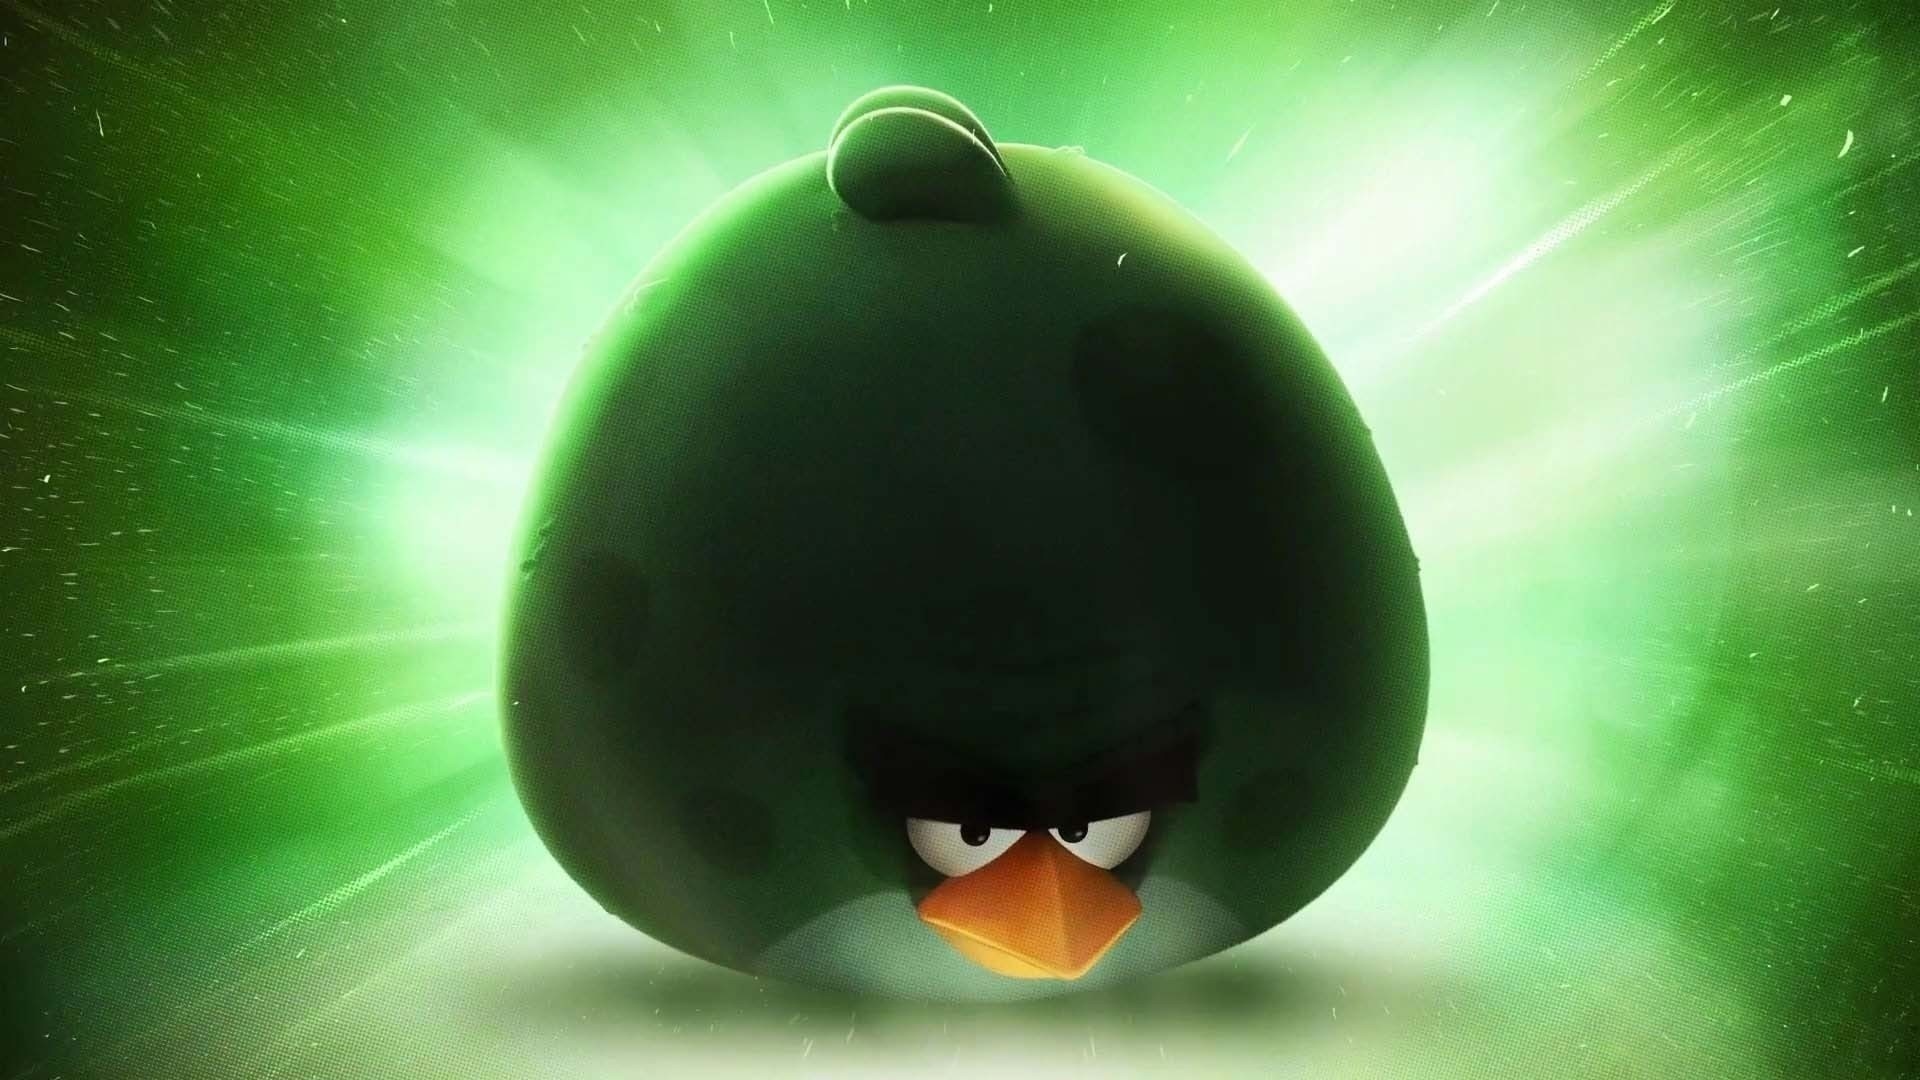 angry birds, games wallpaper for mobile